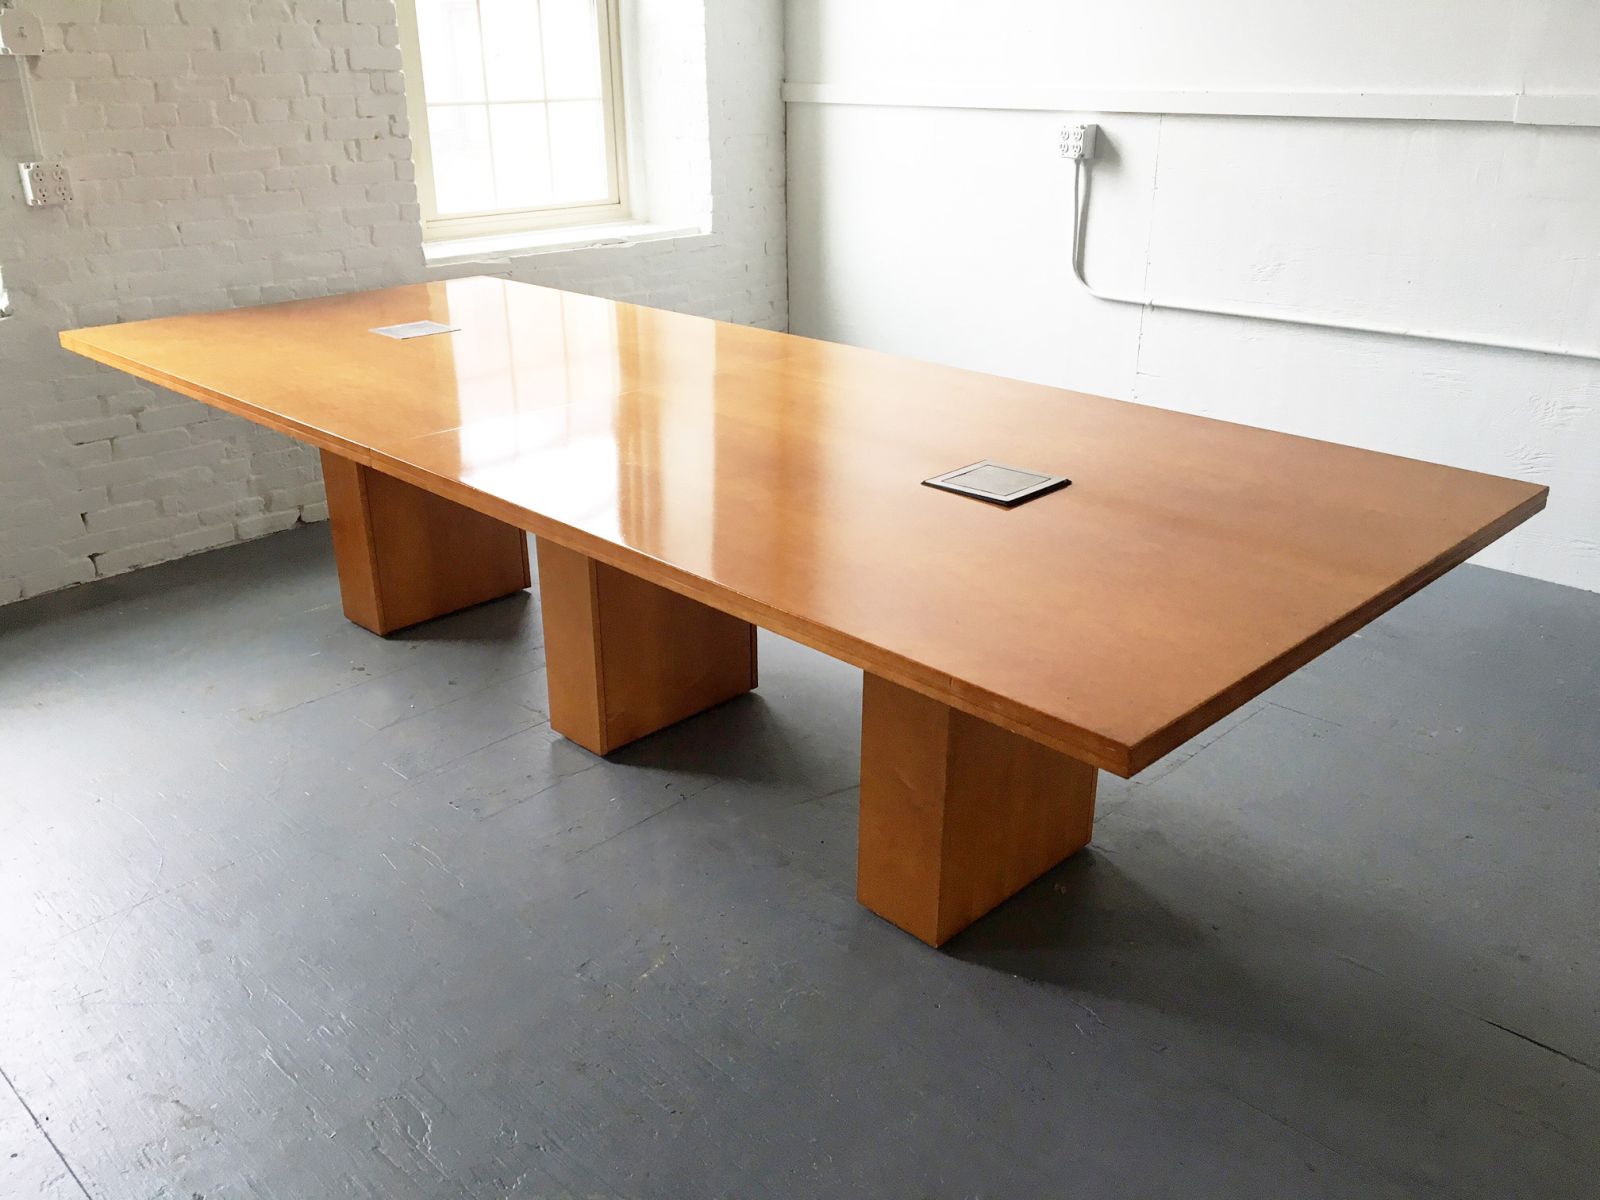 T6101C - 10' x 4' Conference Table